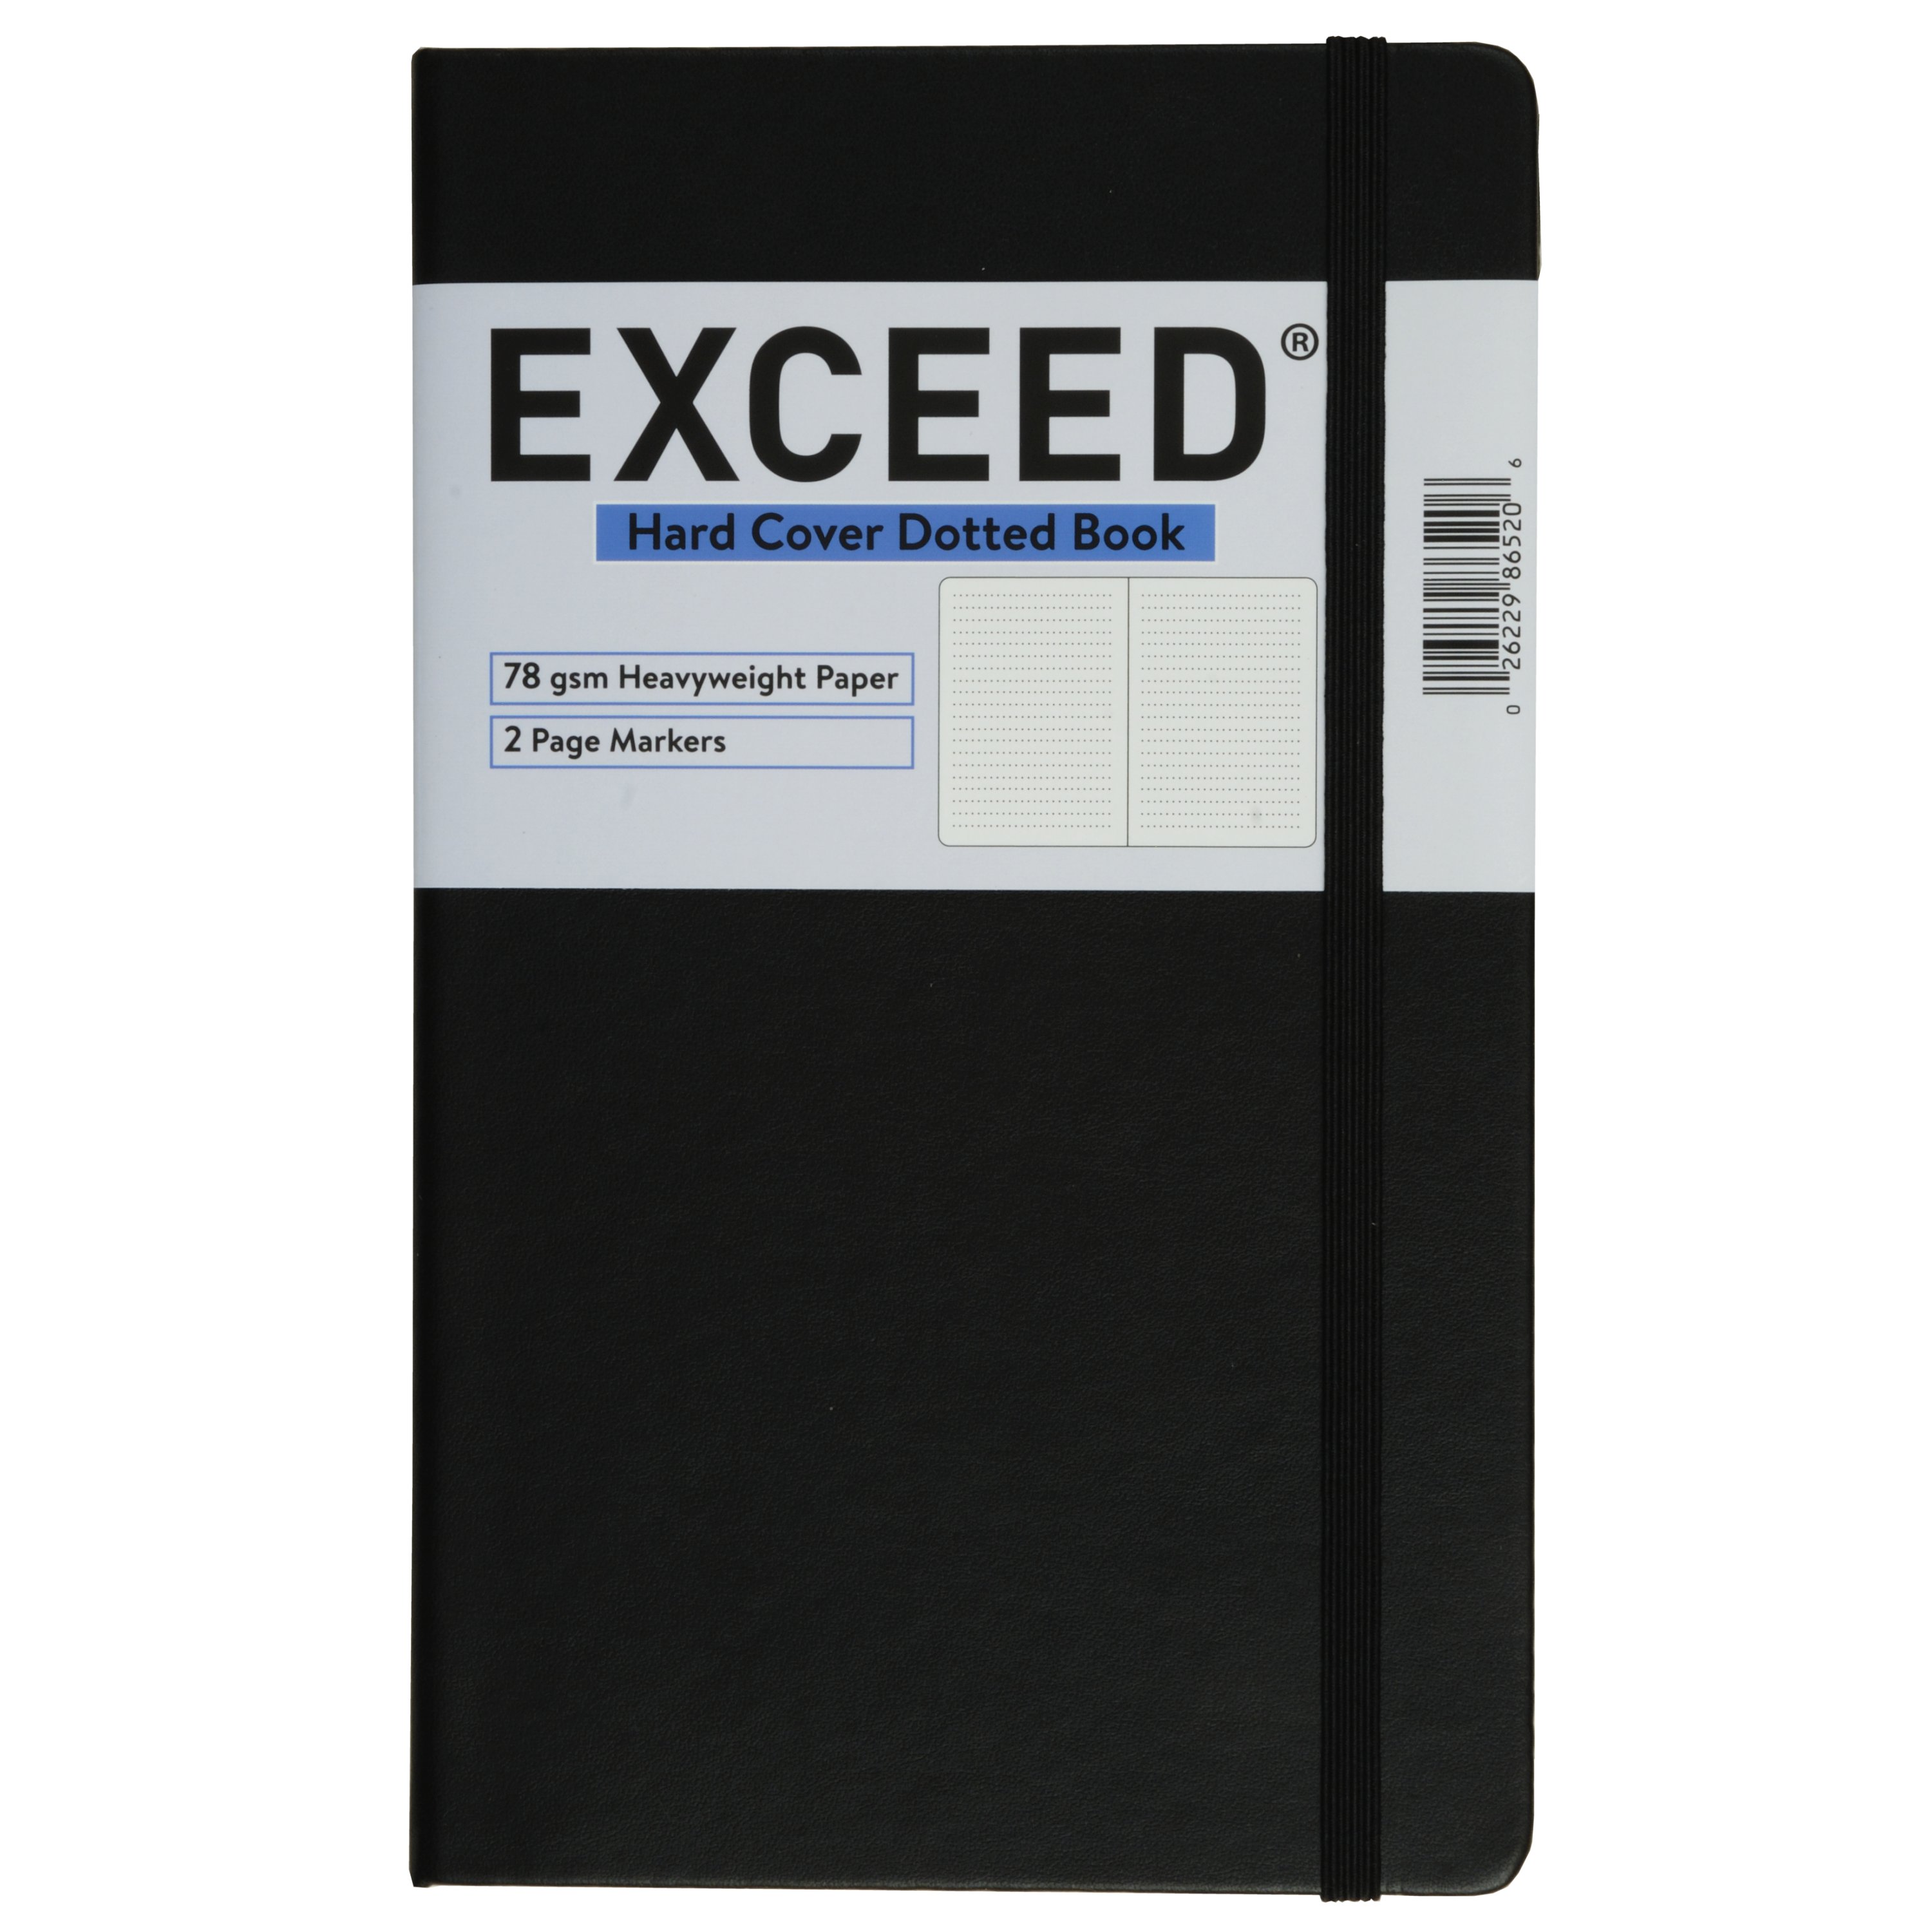 Exceed Medium Journal, Dot Grid, 120 Pages, 5" x 8.25", Black, 86520 - image 1 of 9